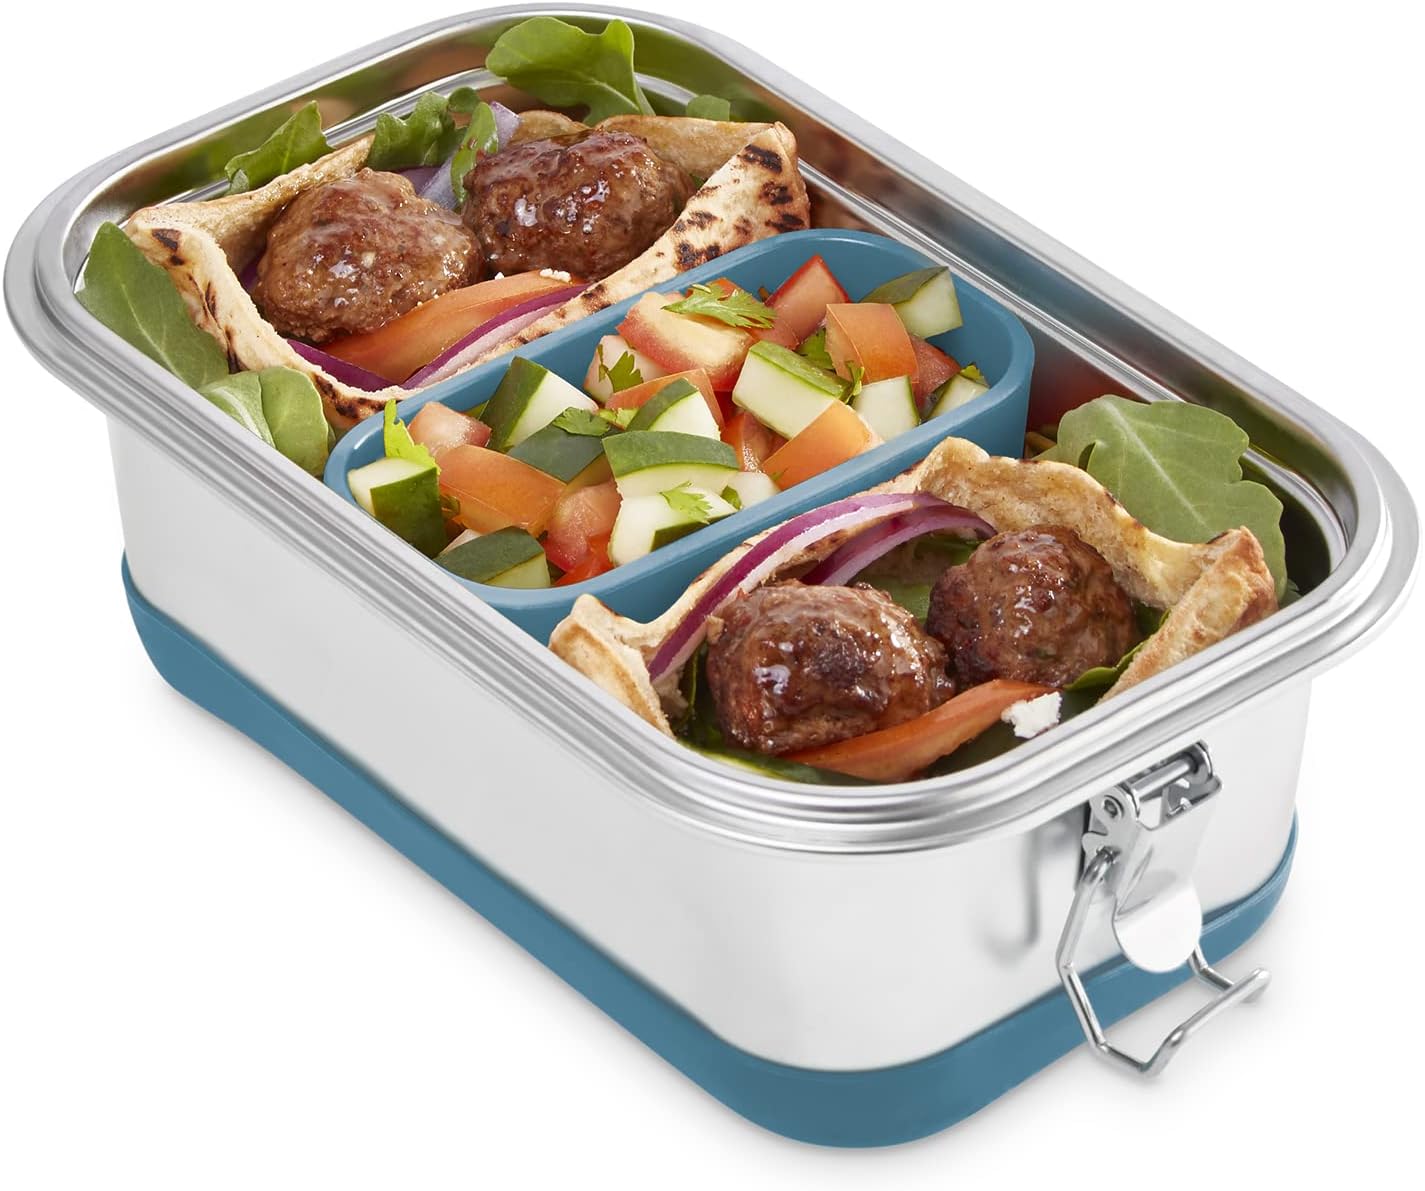 Dash The Fit Cook x Stainless Steel Lunch Box w/ Silicone Insert (6.25-Cup Capacity, Various Colors) $15.99 + Free Shipping w/ Prime